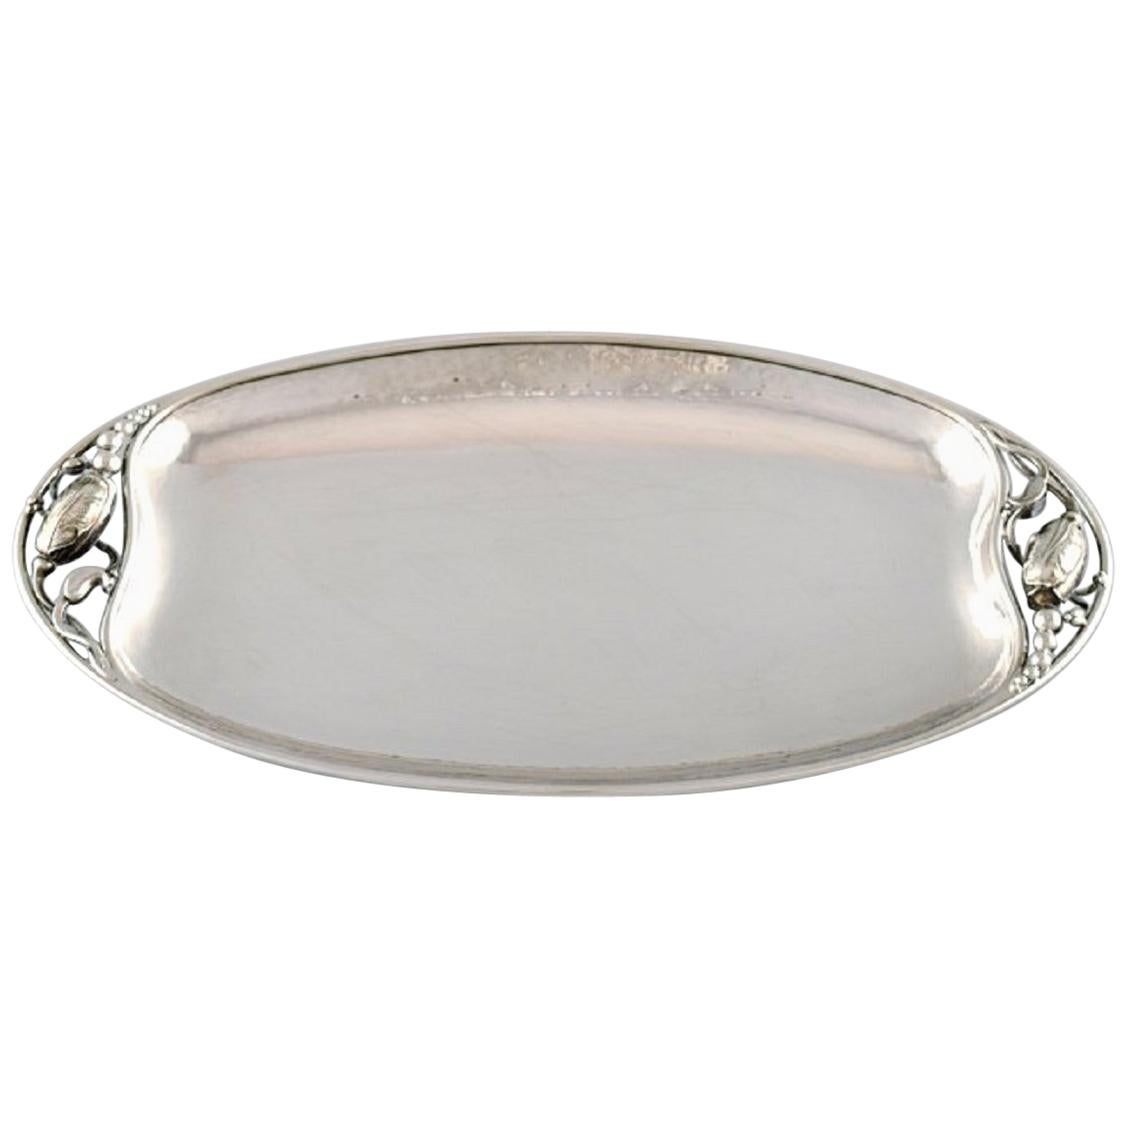 Georg Jensen "Blossom" Large Bread Tray in Sterling Silver For Sale